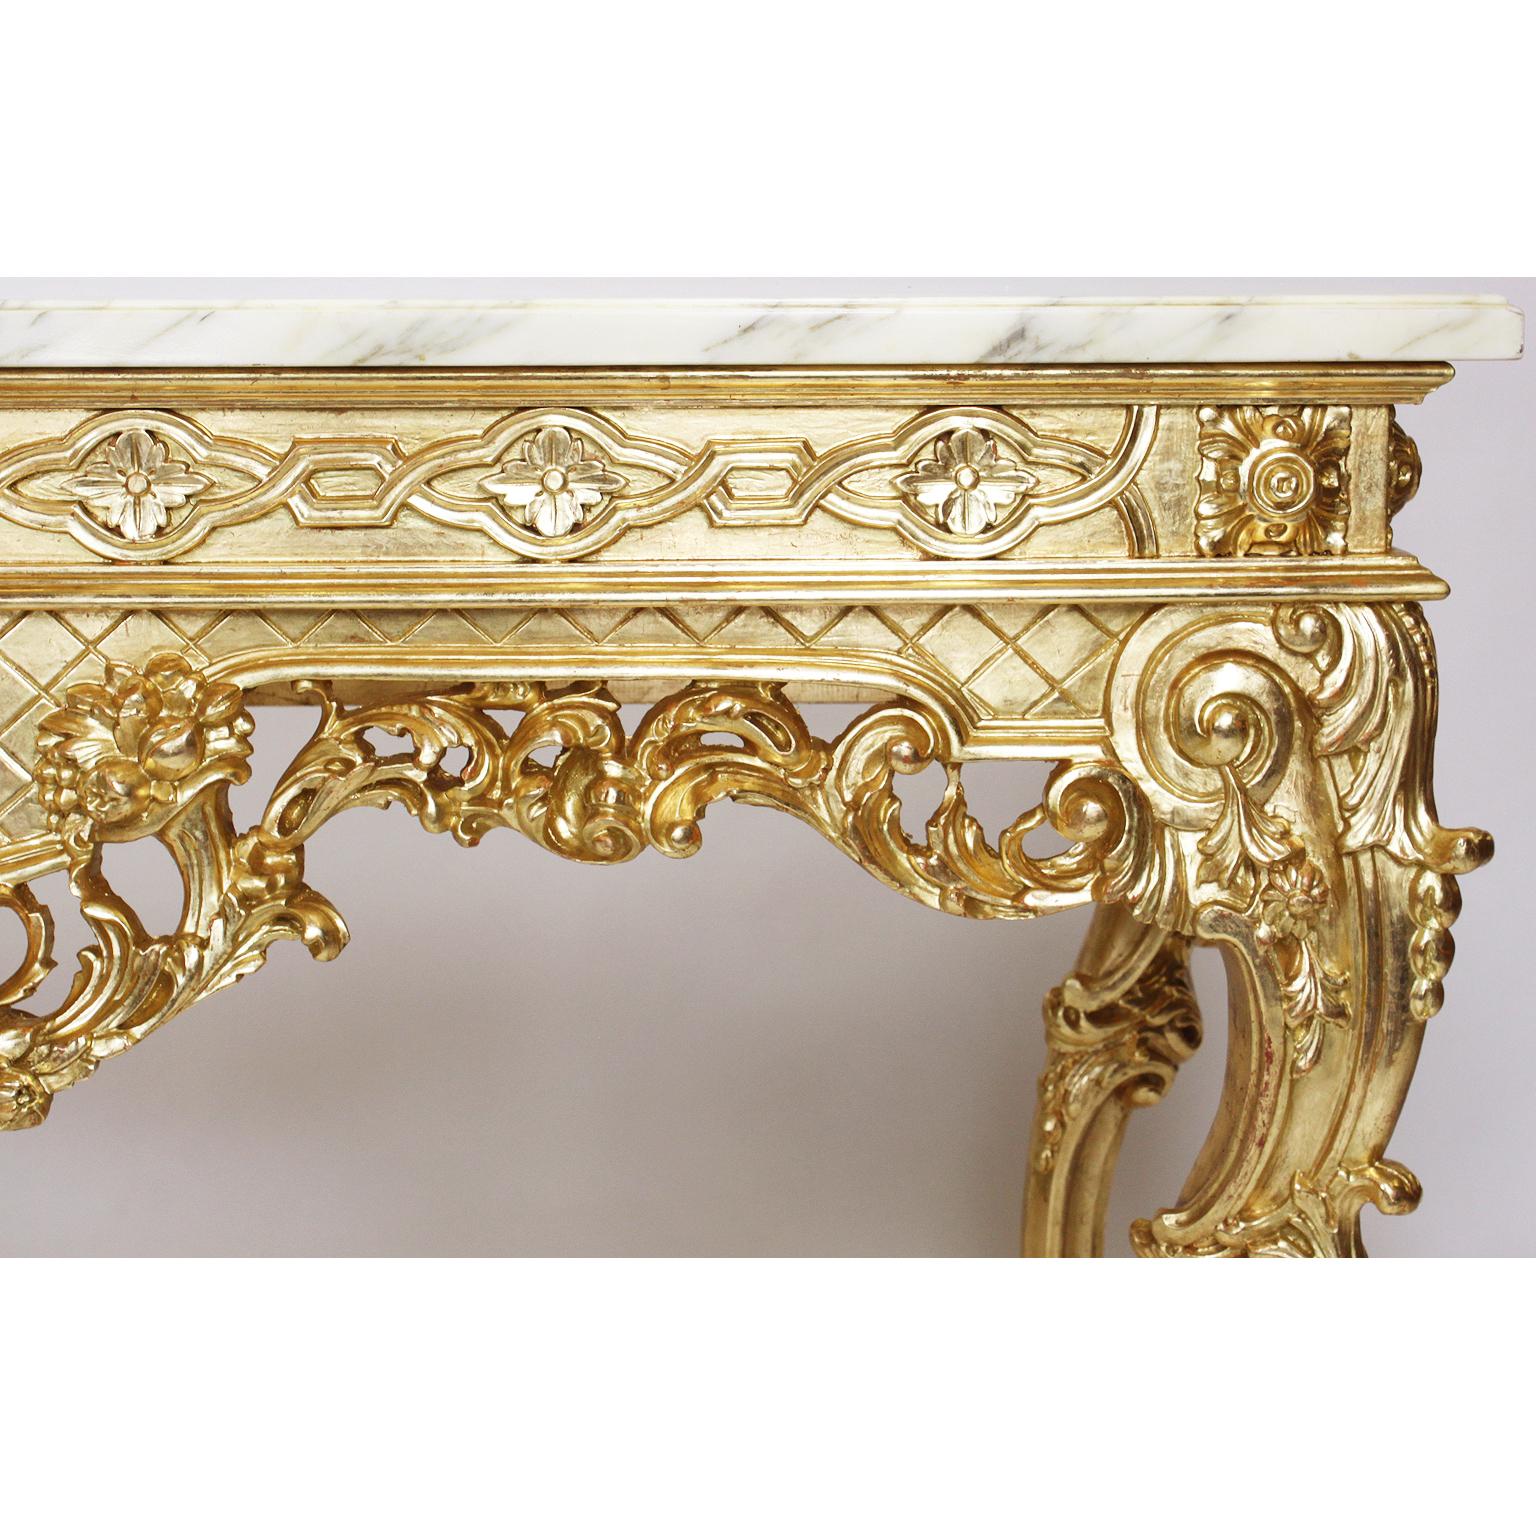 20th Century English George II Style Giltwood Carved Console Table with Marble Top For Sale